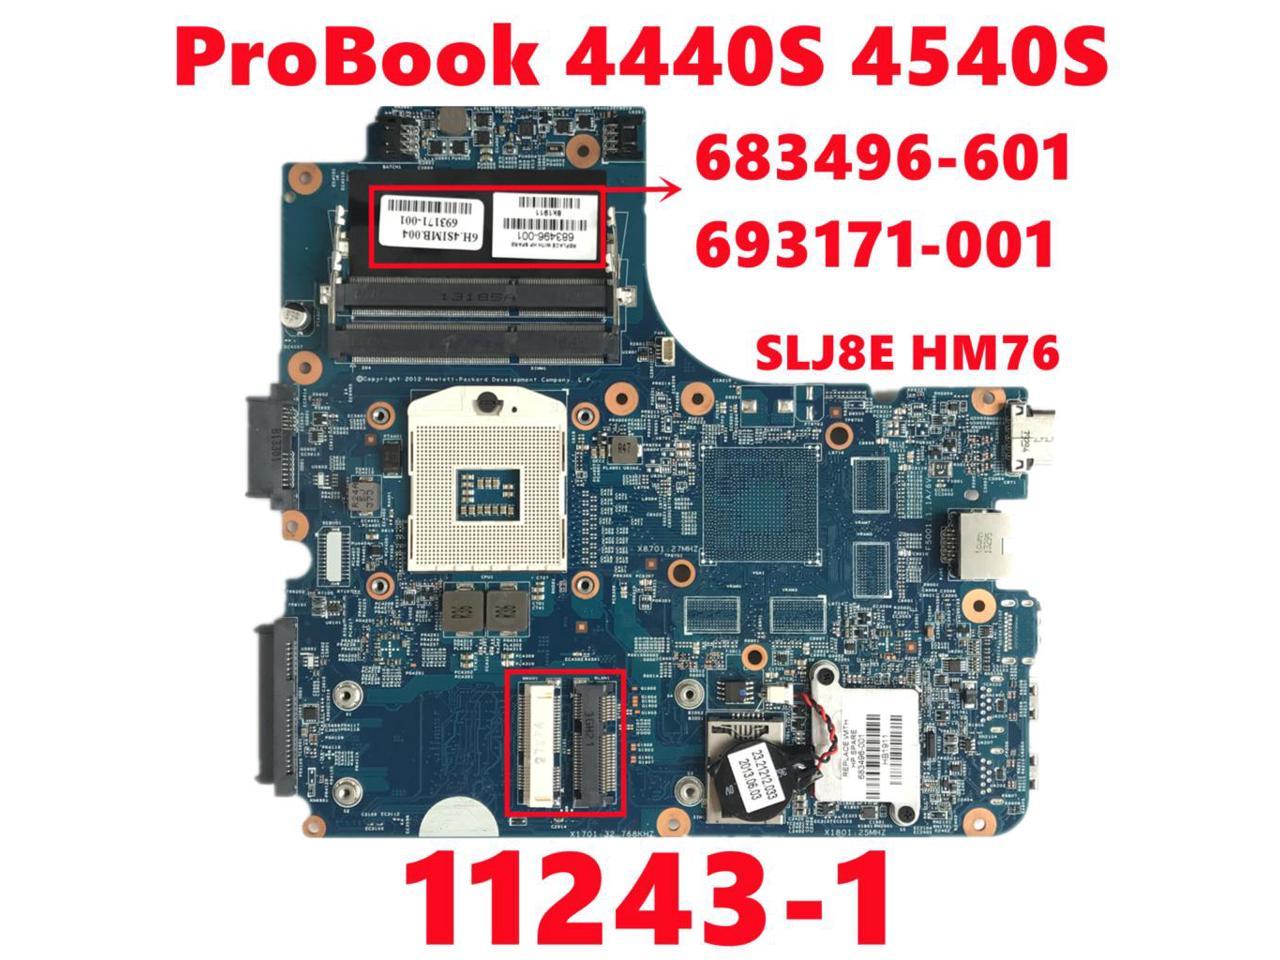 REFIT 683496-001 for probook 683496-001 683496-501 4540S 4440S Laptop Motherboard Quality Goods 100% Tested